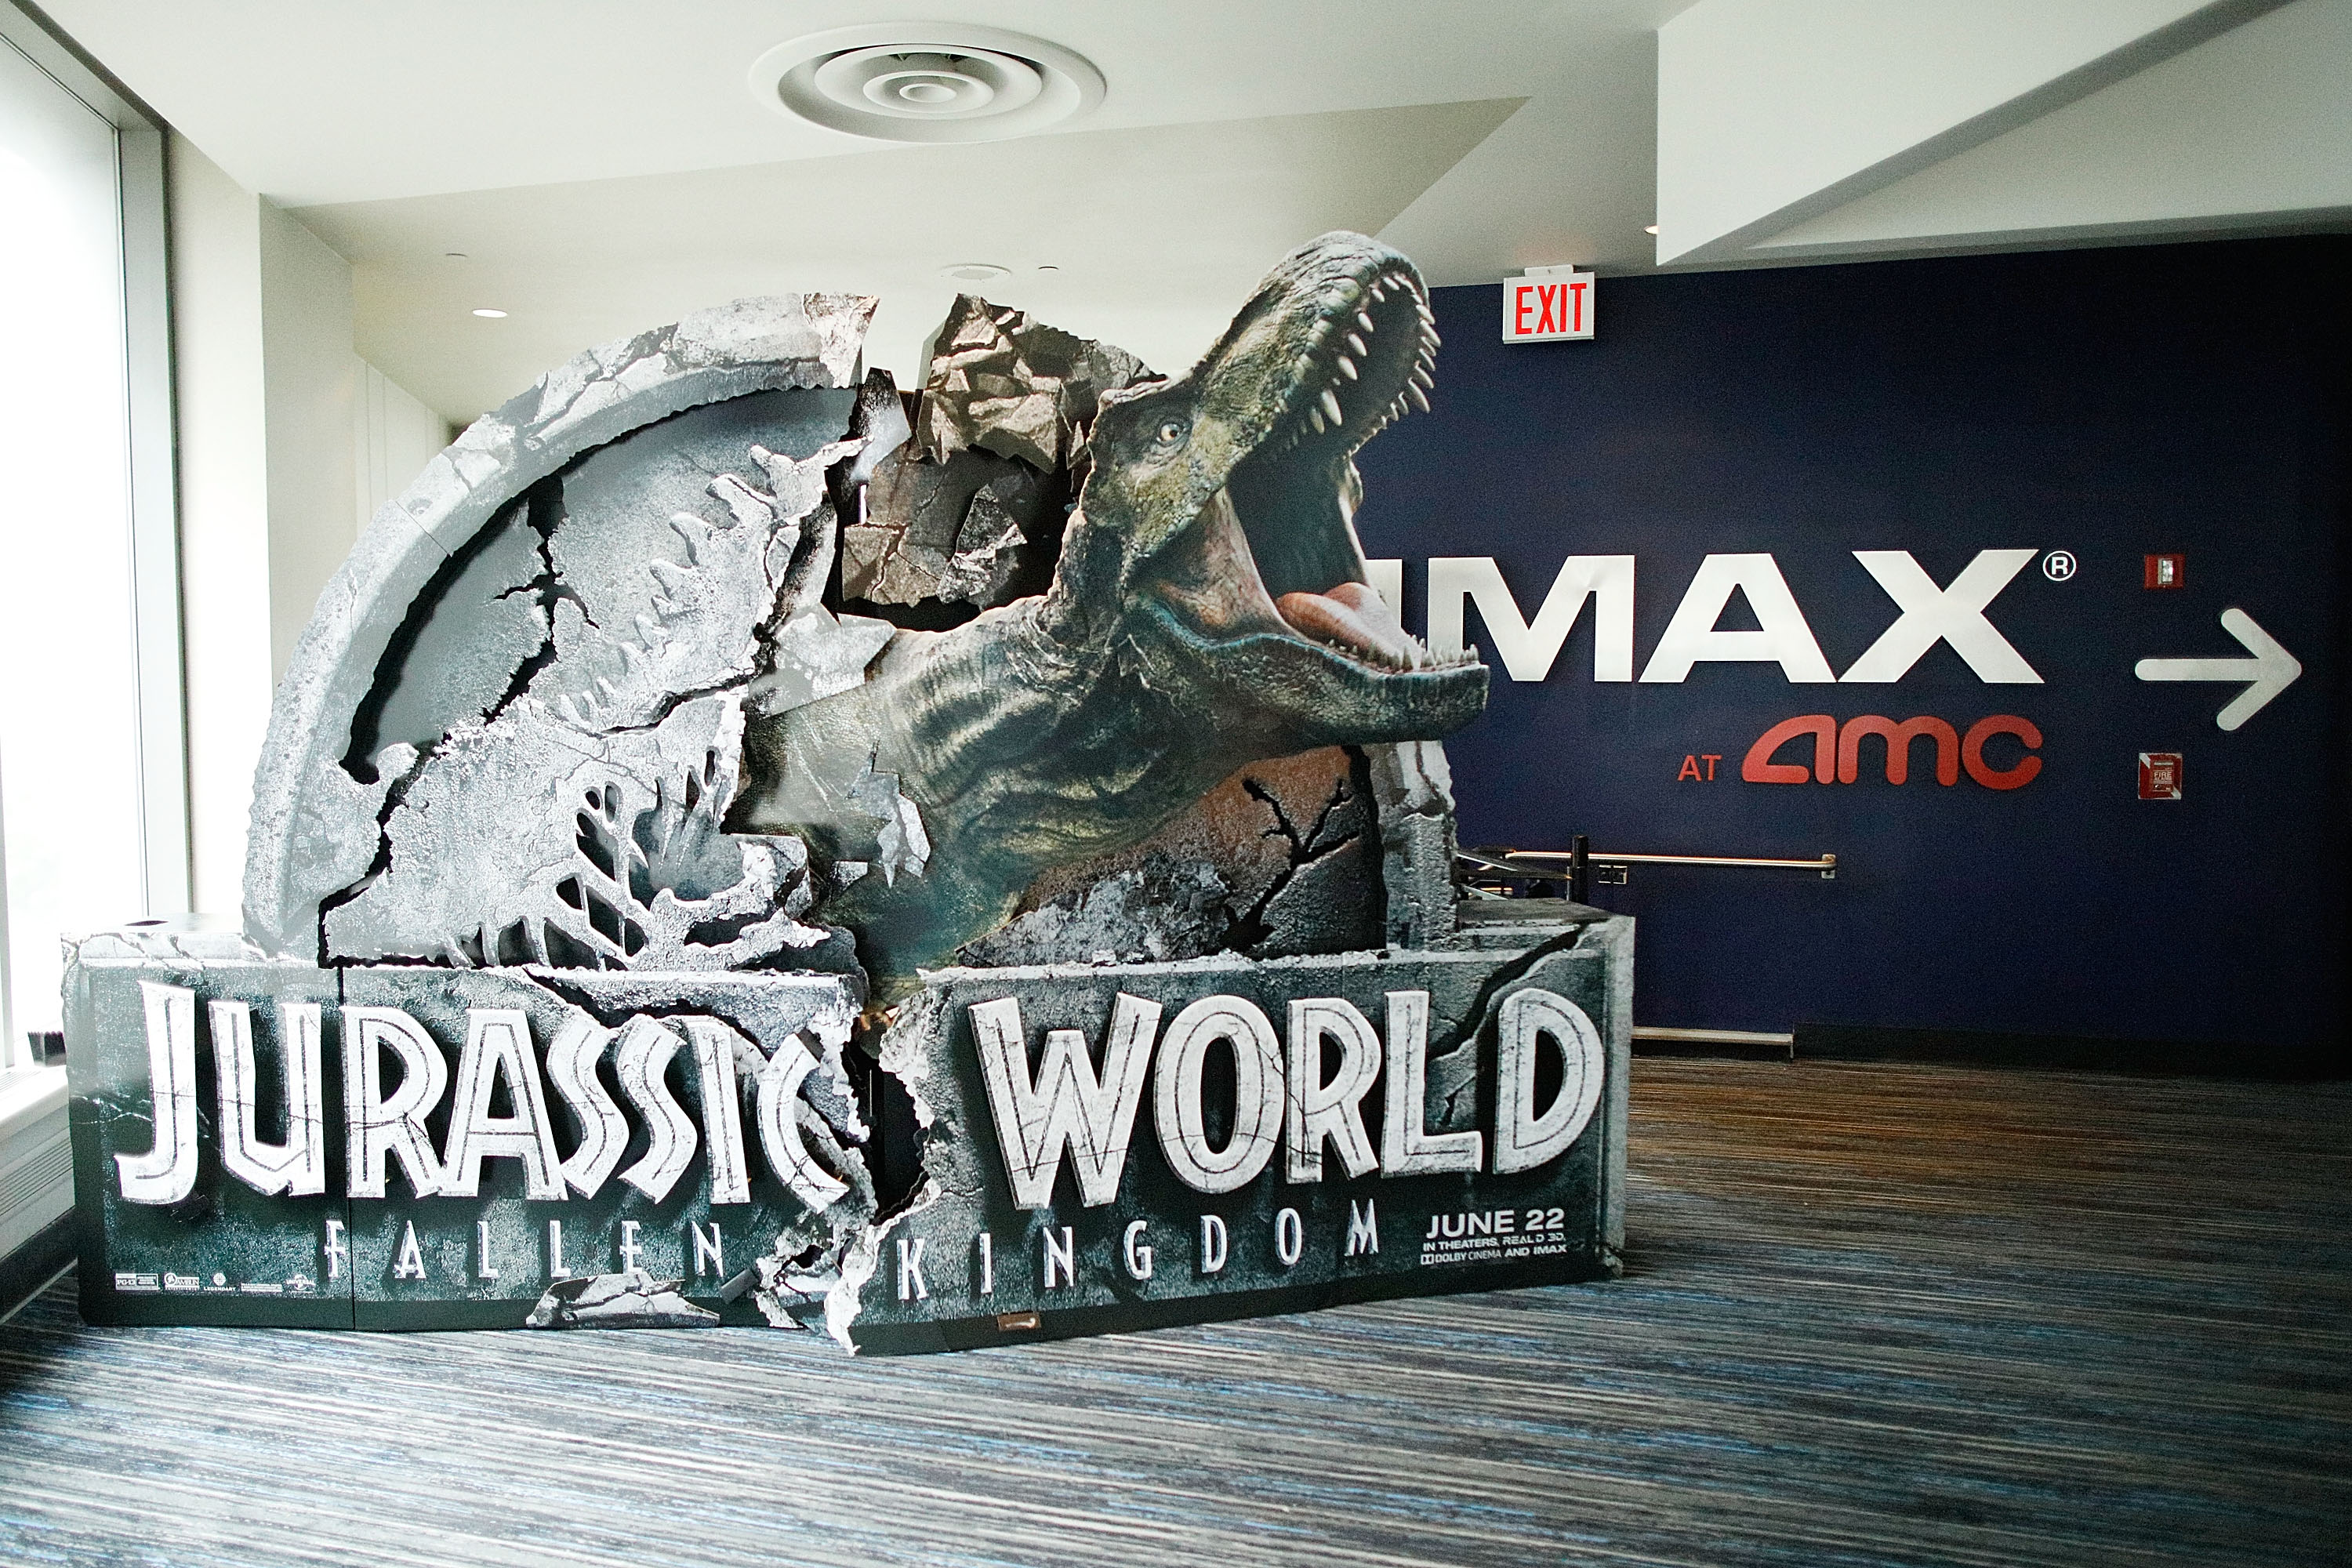 A theater showing the new Jurassic World film